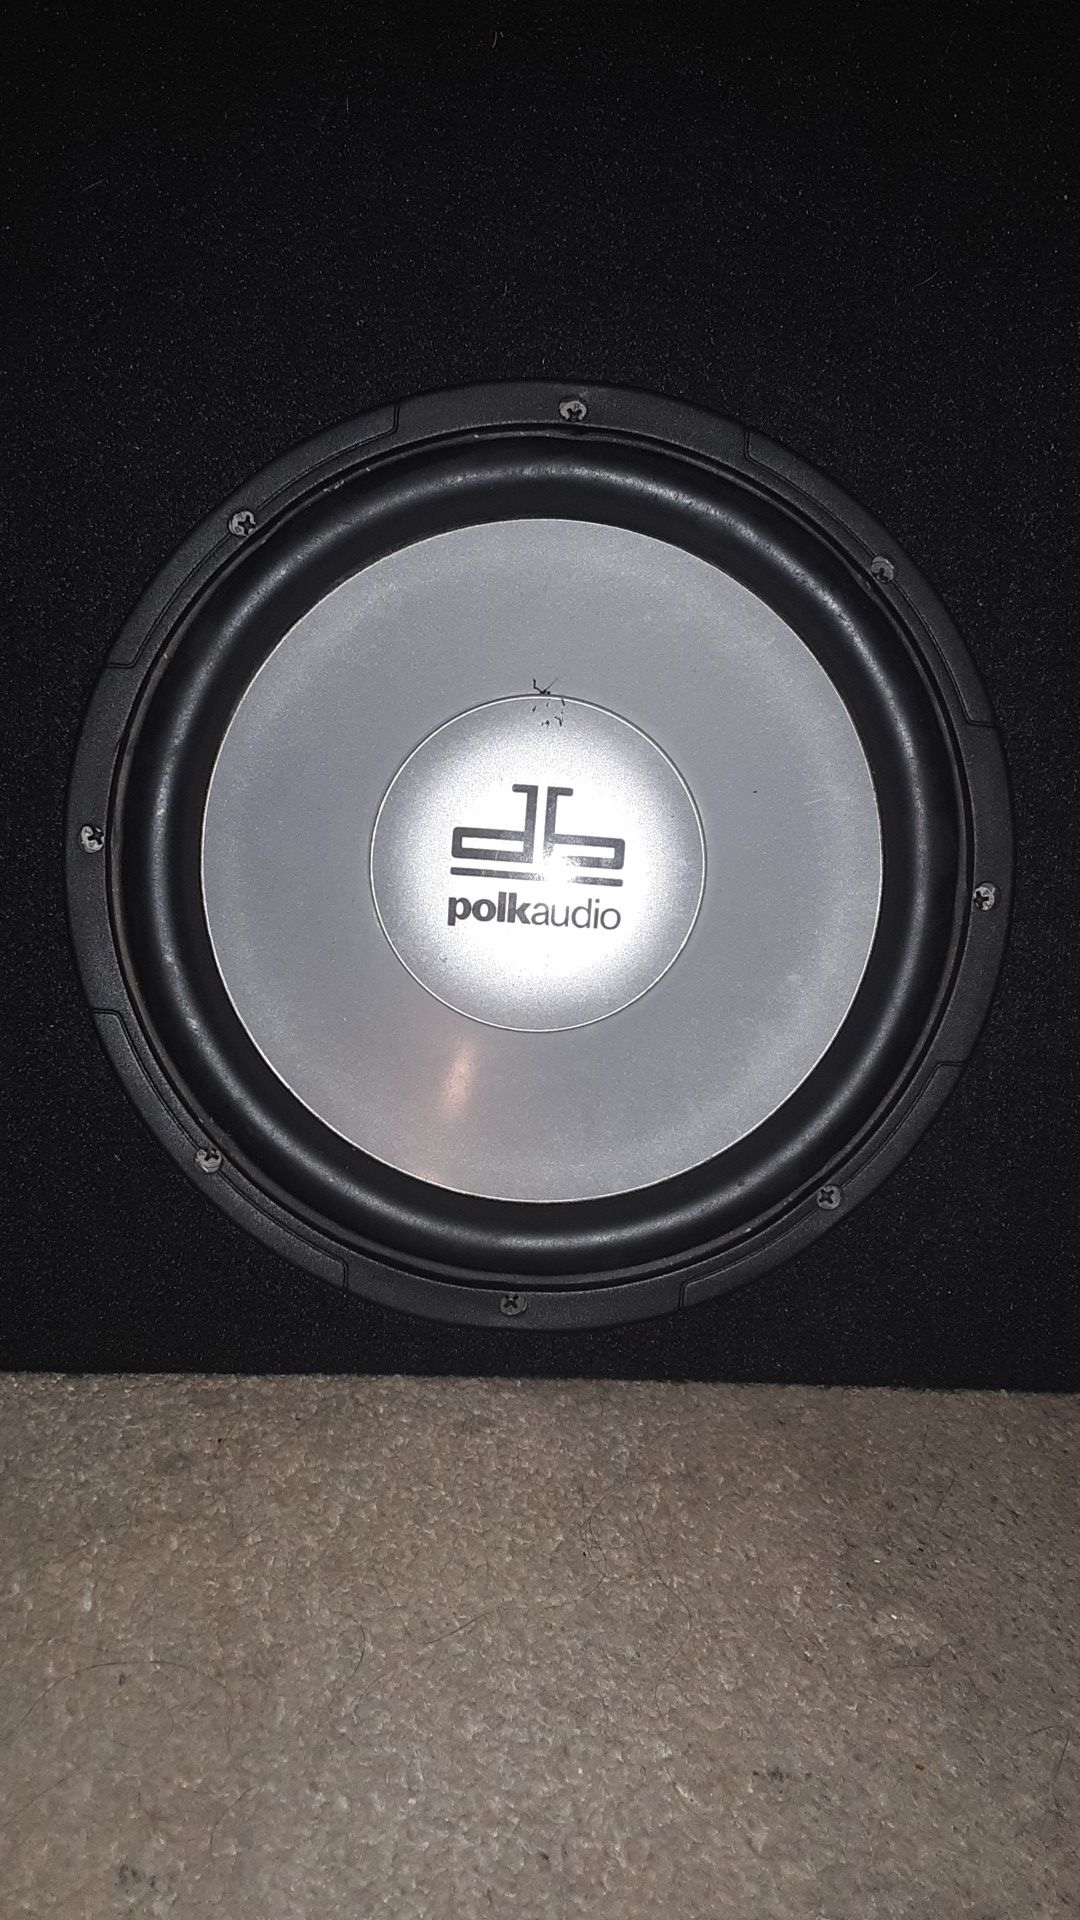 Polk audio 10 inch sub with a groundshaker box included